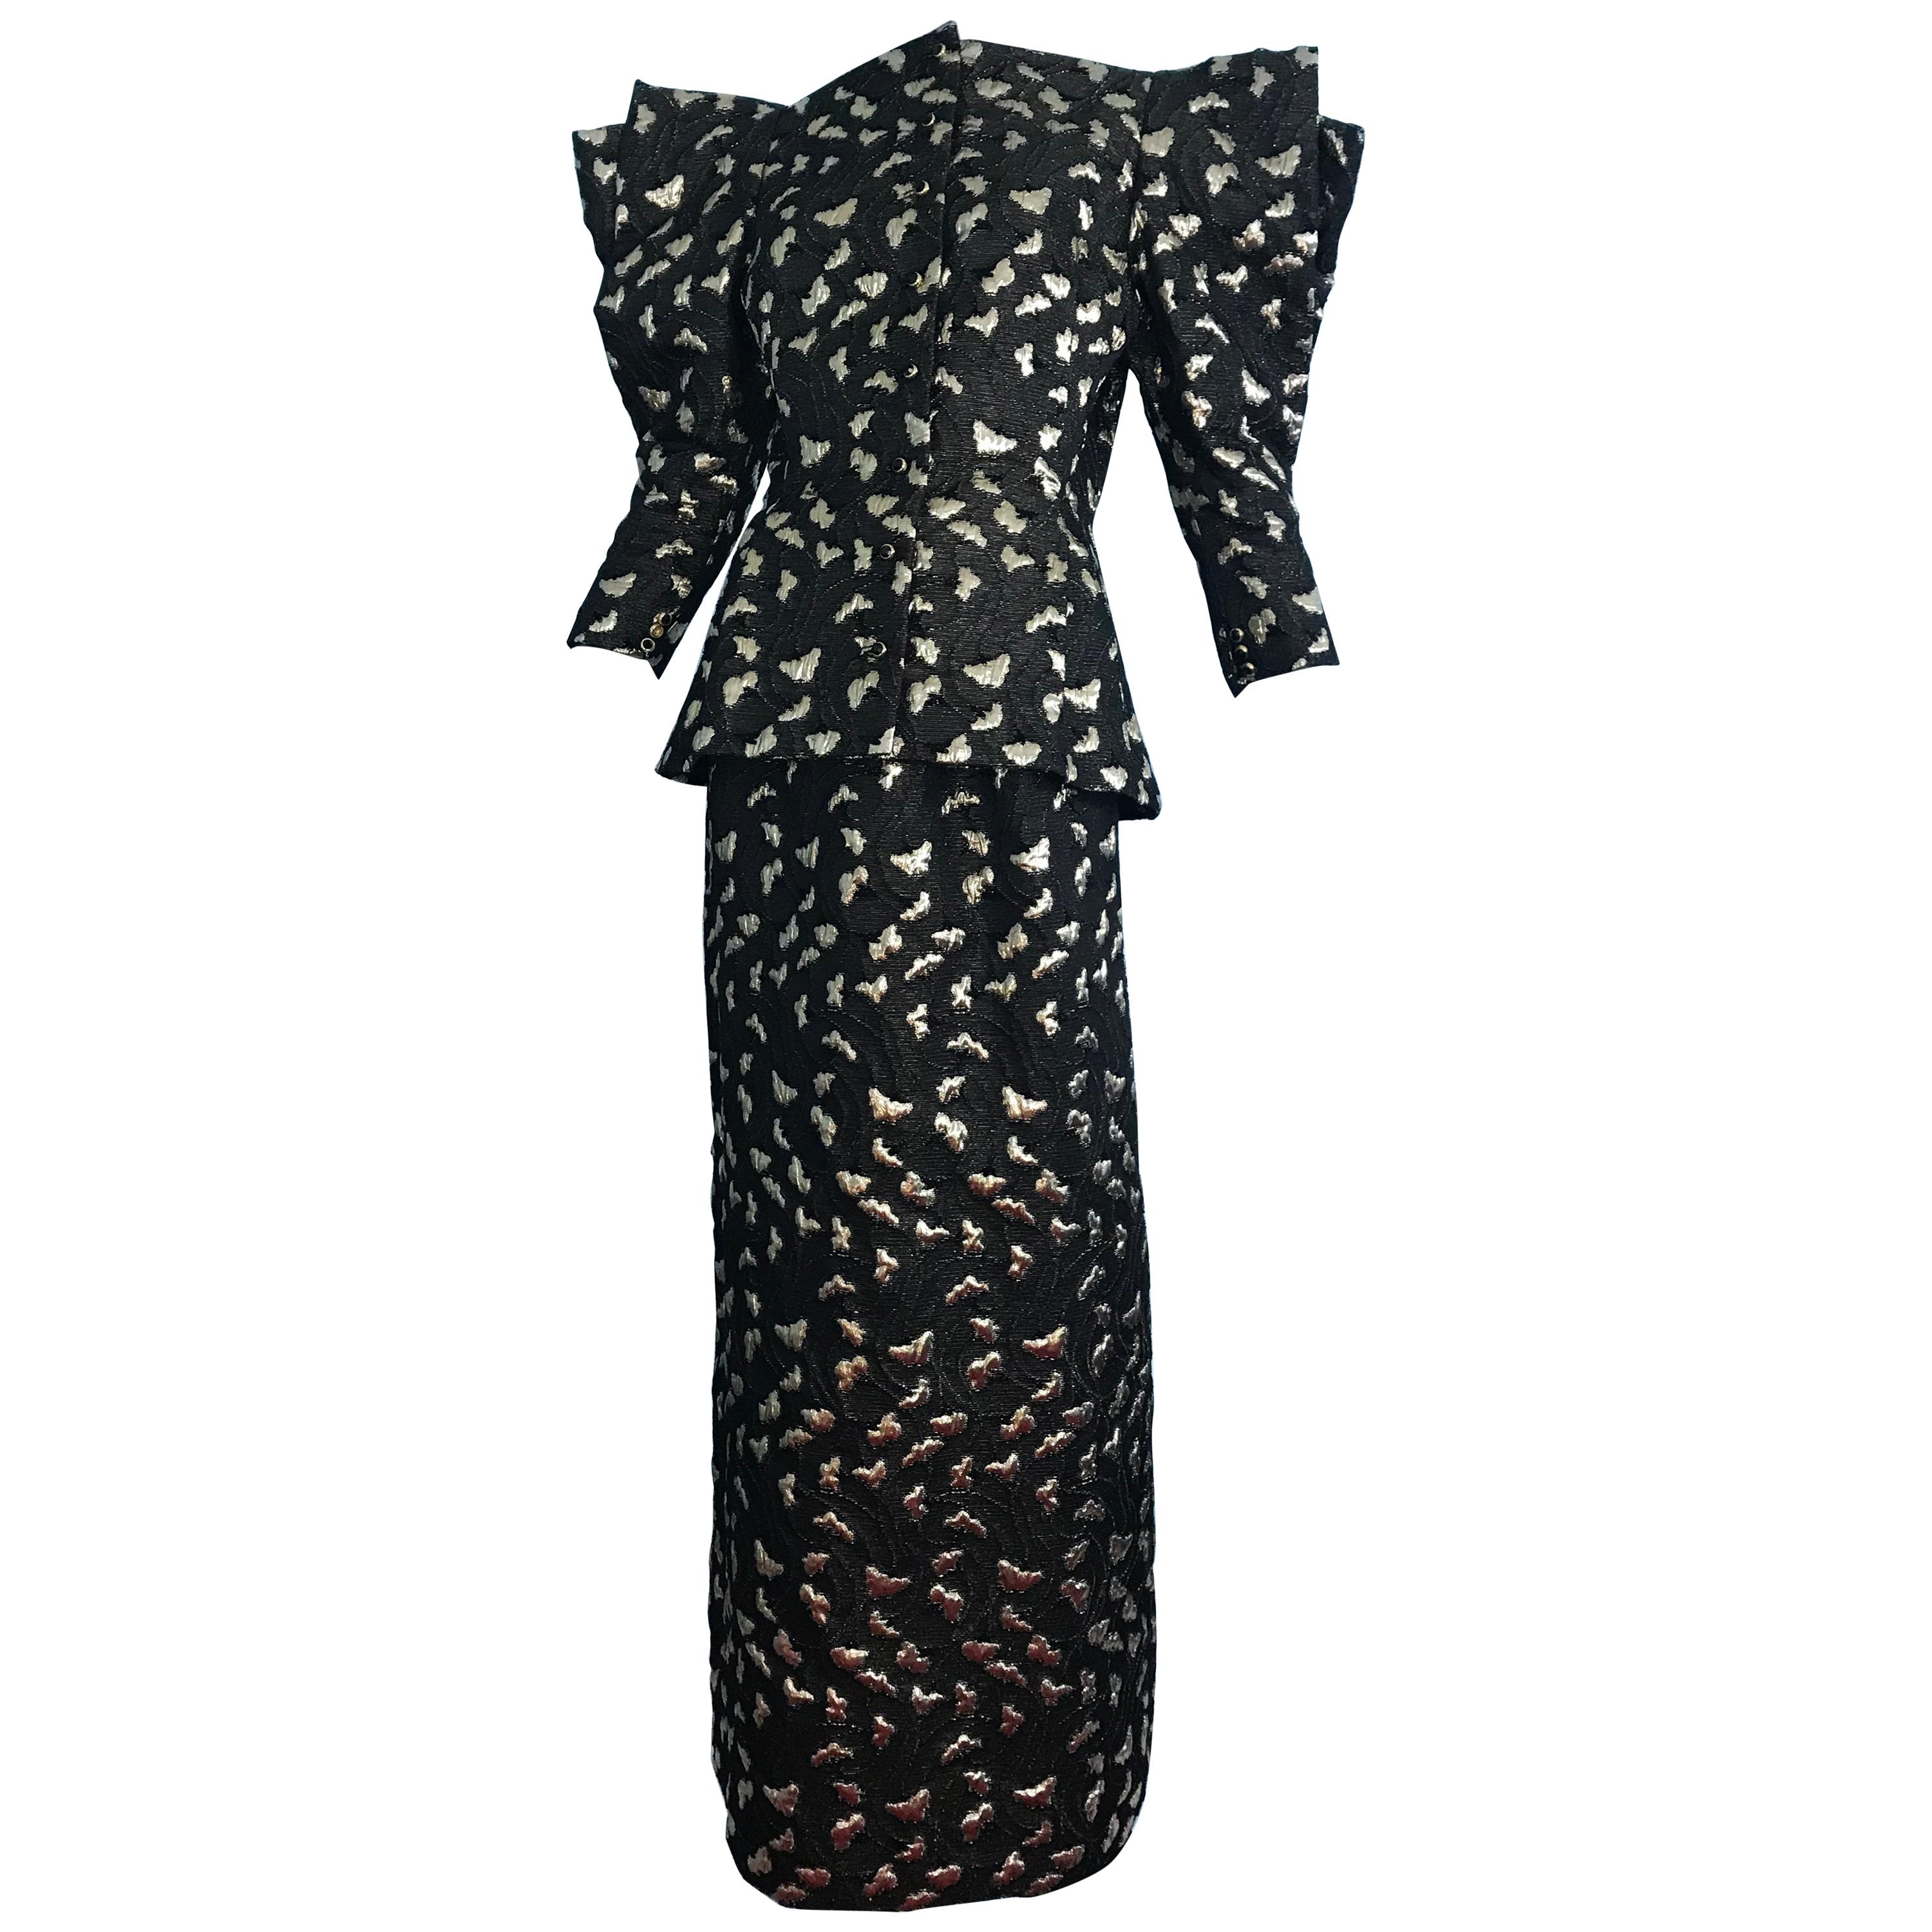 Pauline Trigere Black and Gold Brocade 2 Piece Skirt Suit, 1980s For Sale